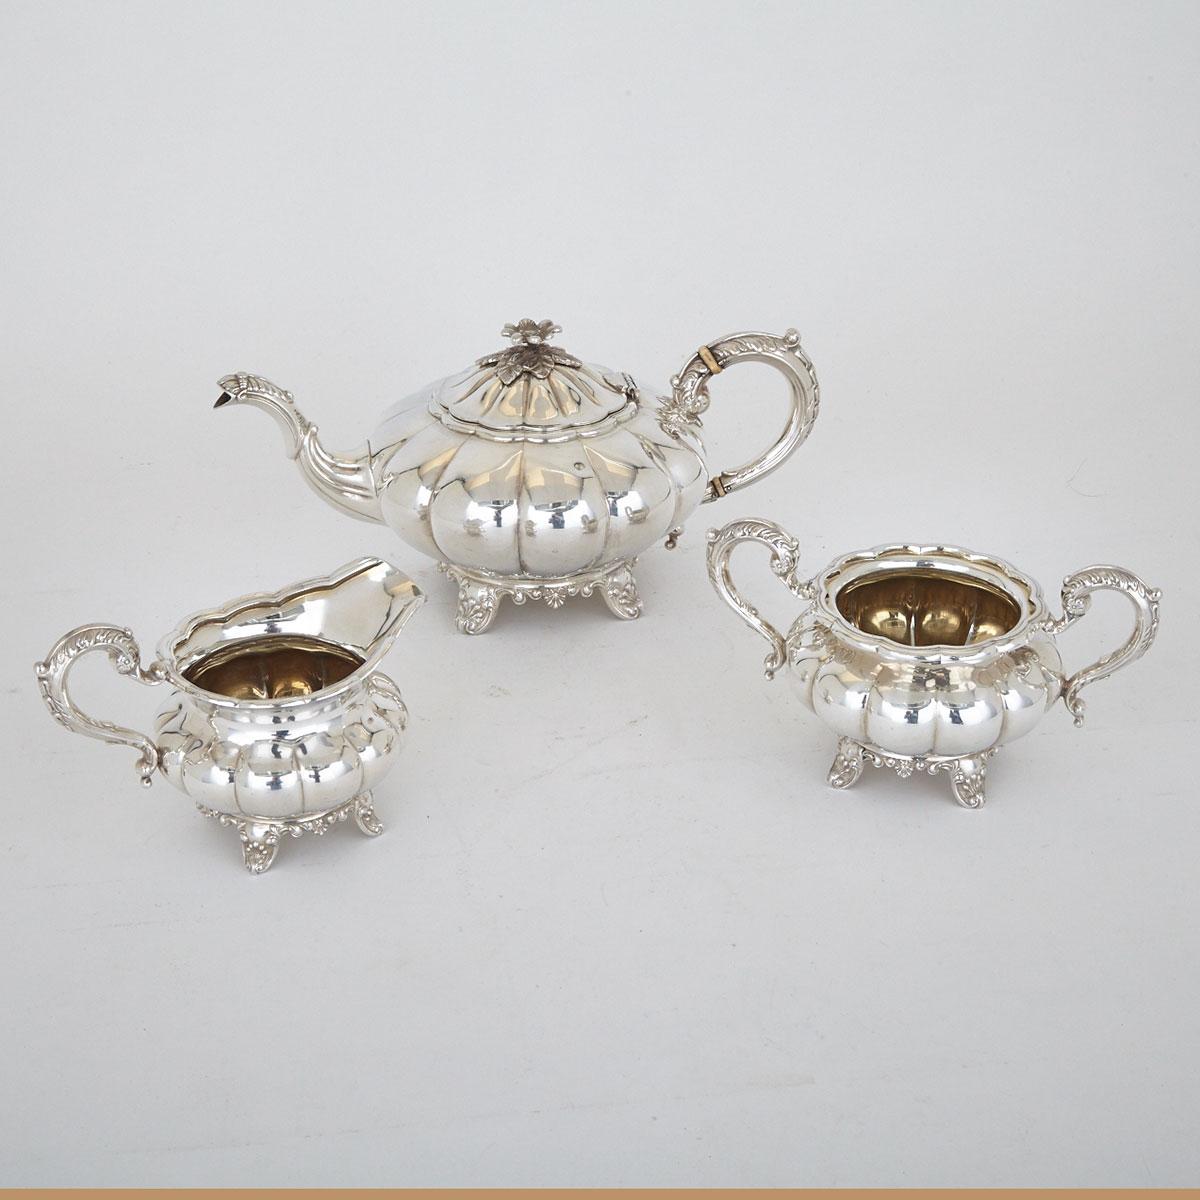 Canadian Silver Tea Service, Henry Birks & Sons, Montreal, Que., 1939